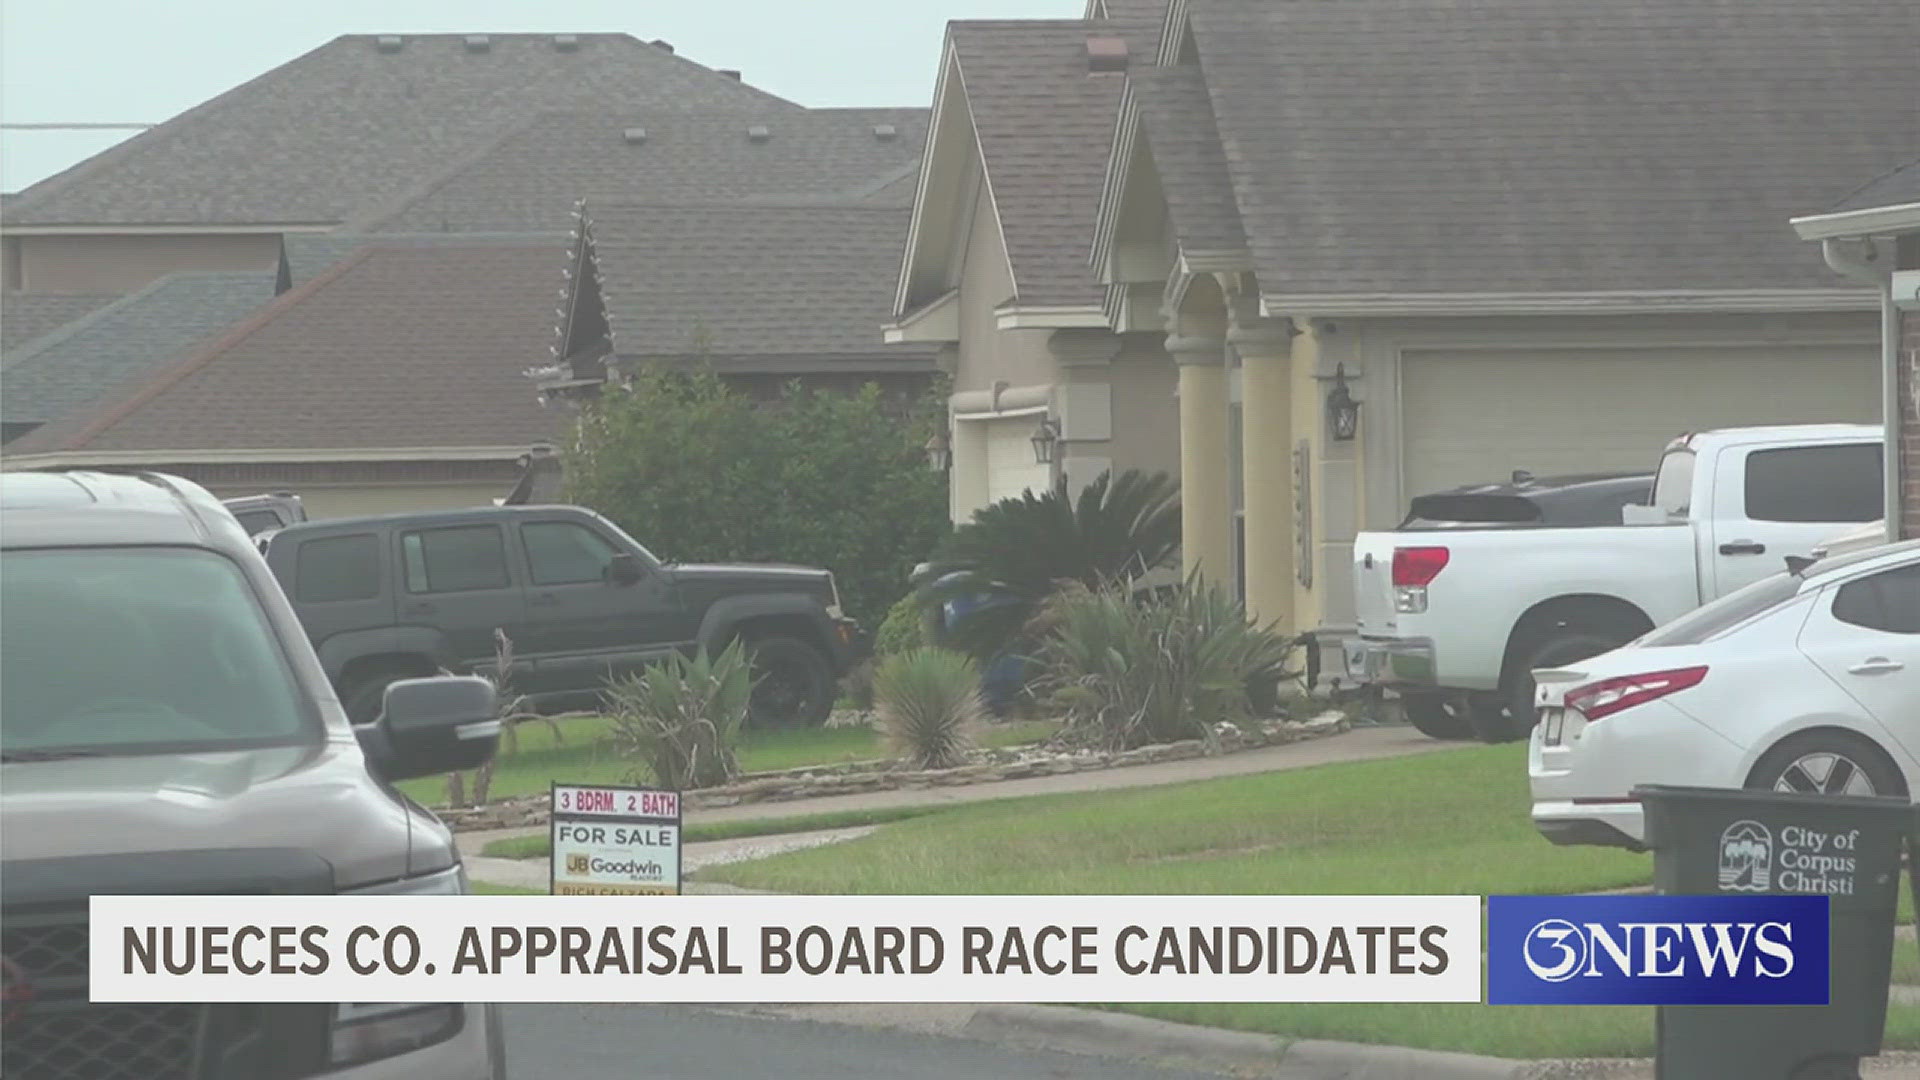 You can cast your vote for the appraisal board during the Nueces County Joint Election on Saturday.